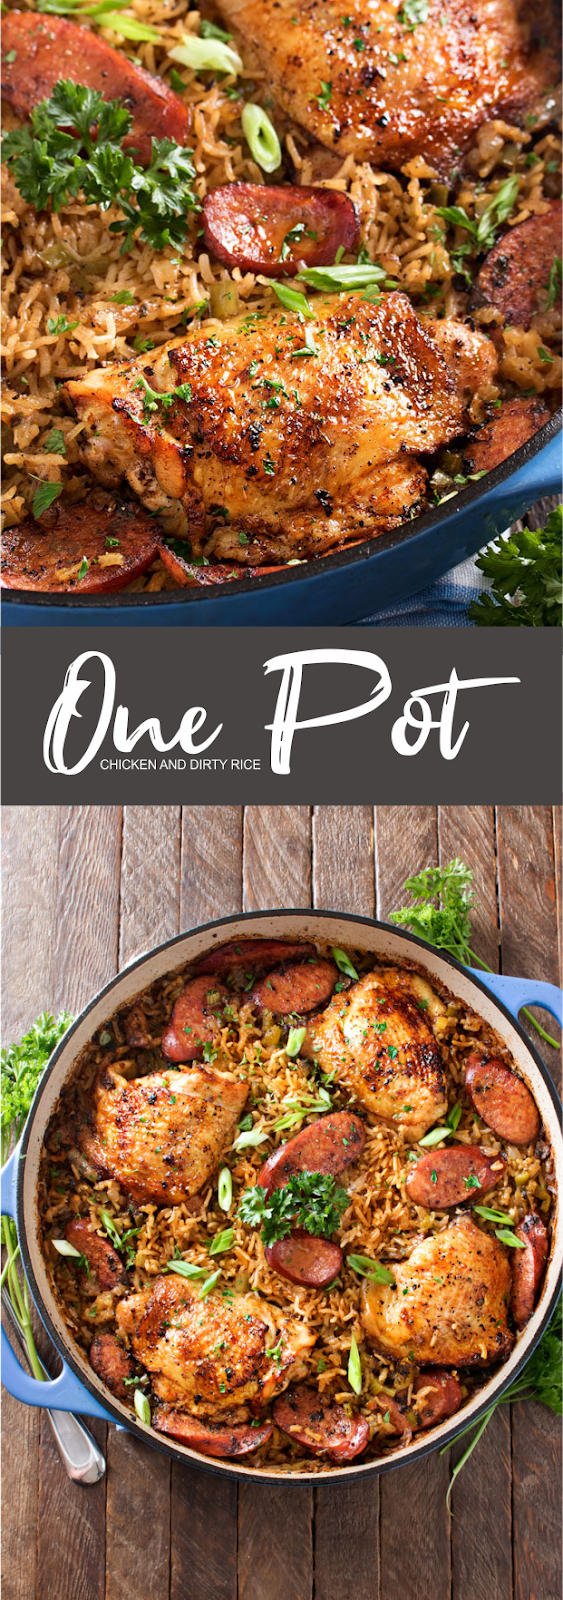 ONE POT CHICKEN AND DIRTY RICE Recipes – Home Inspiration and DIY ...